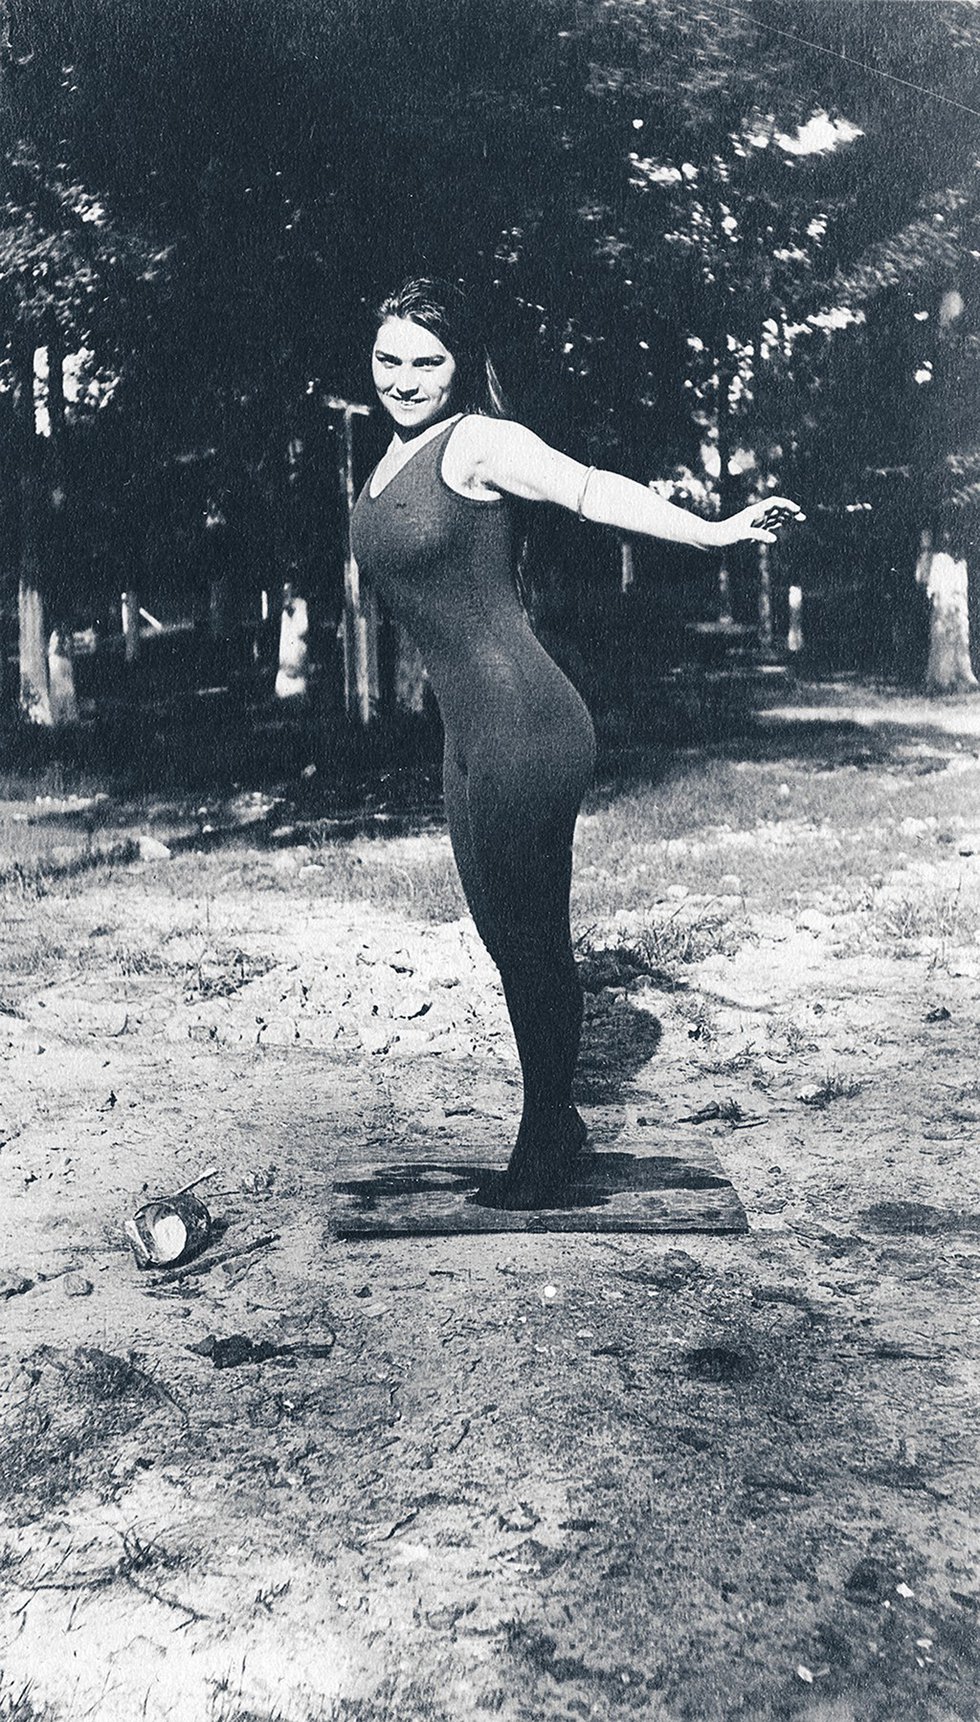 This woman in black tights is probably a circus performer. Just imagine how “scandalous” such a costume would have been in 1912.